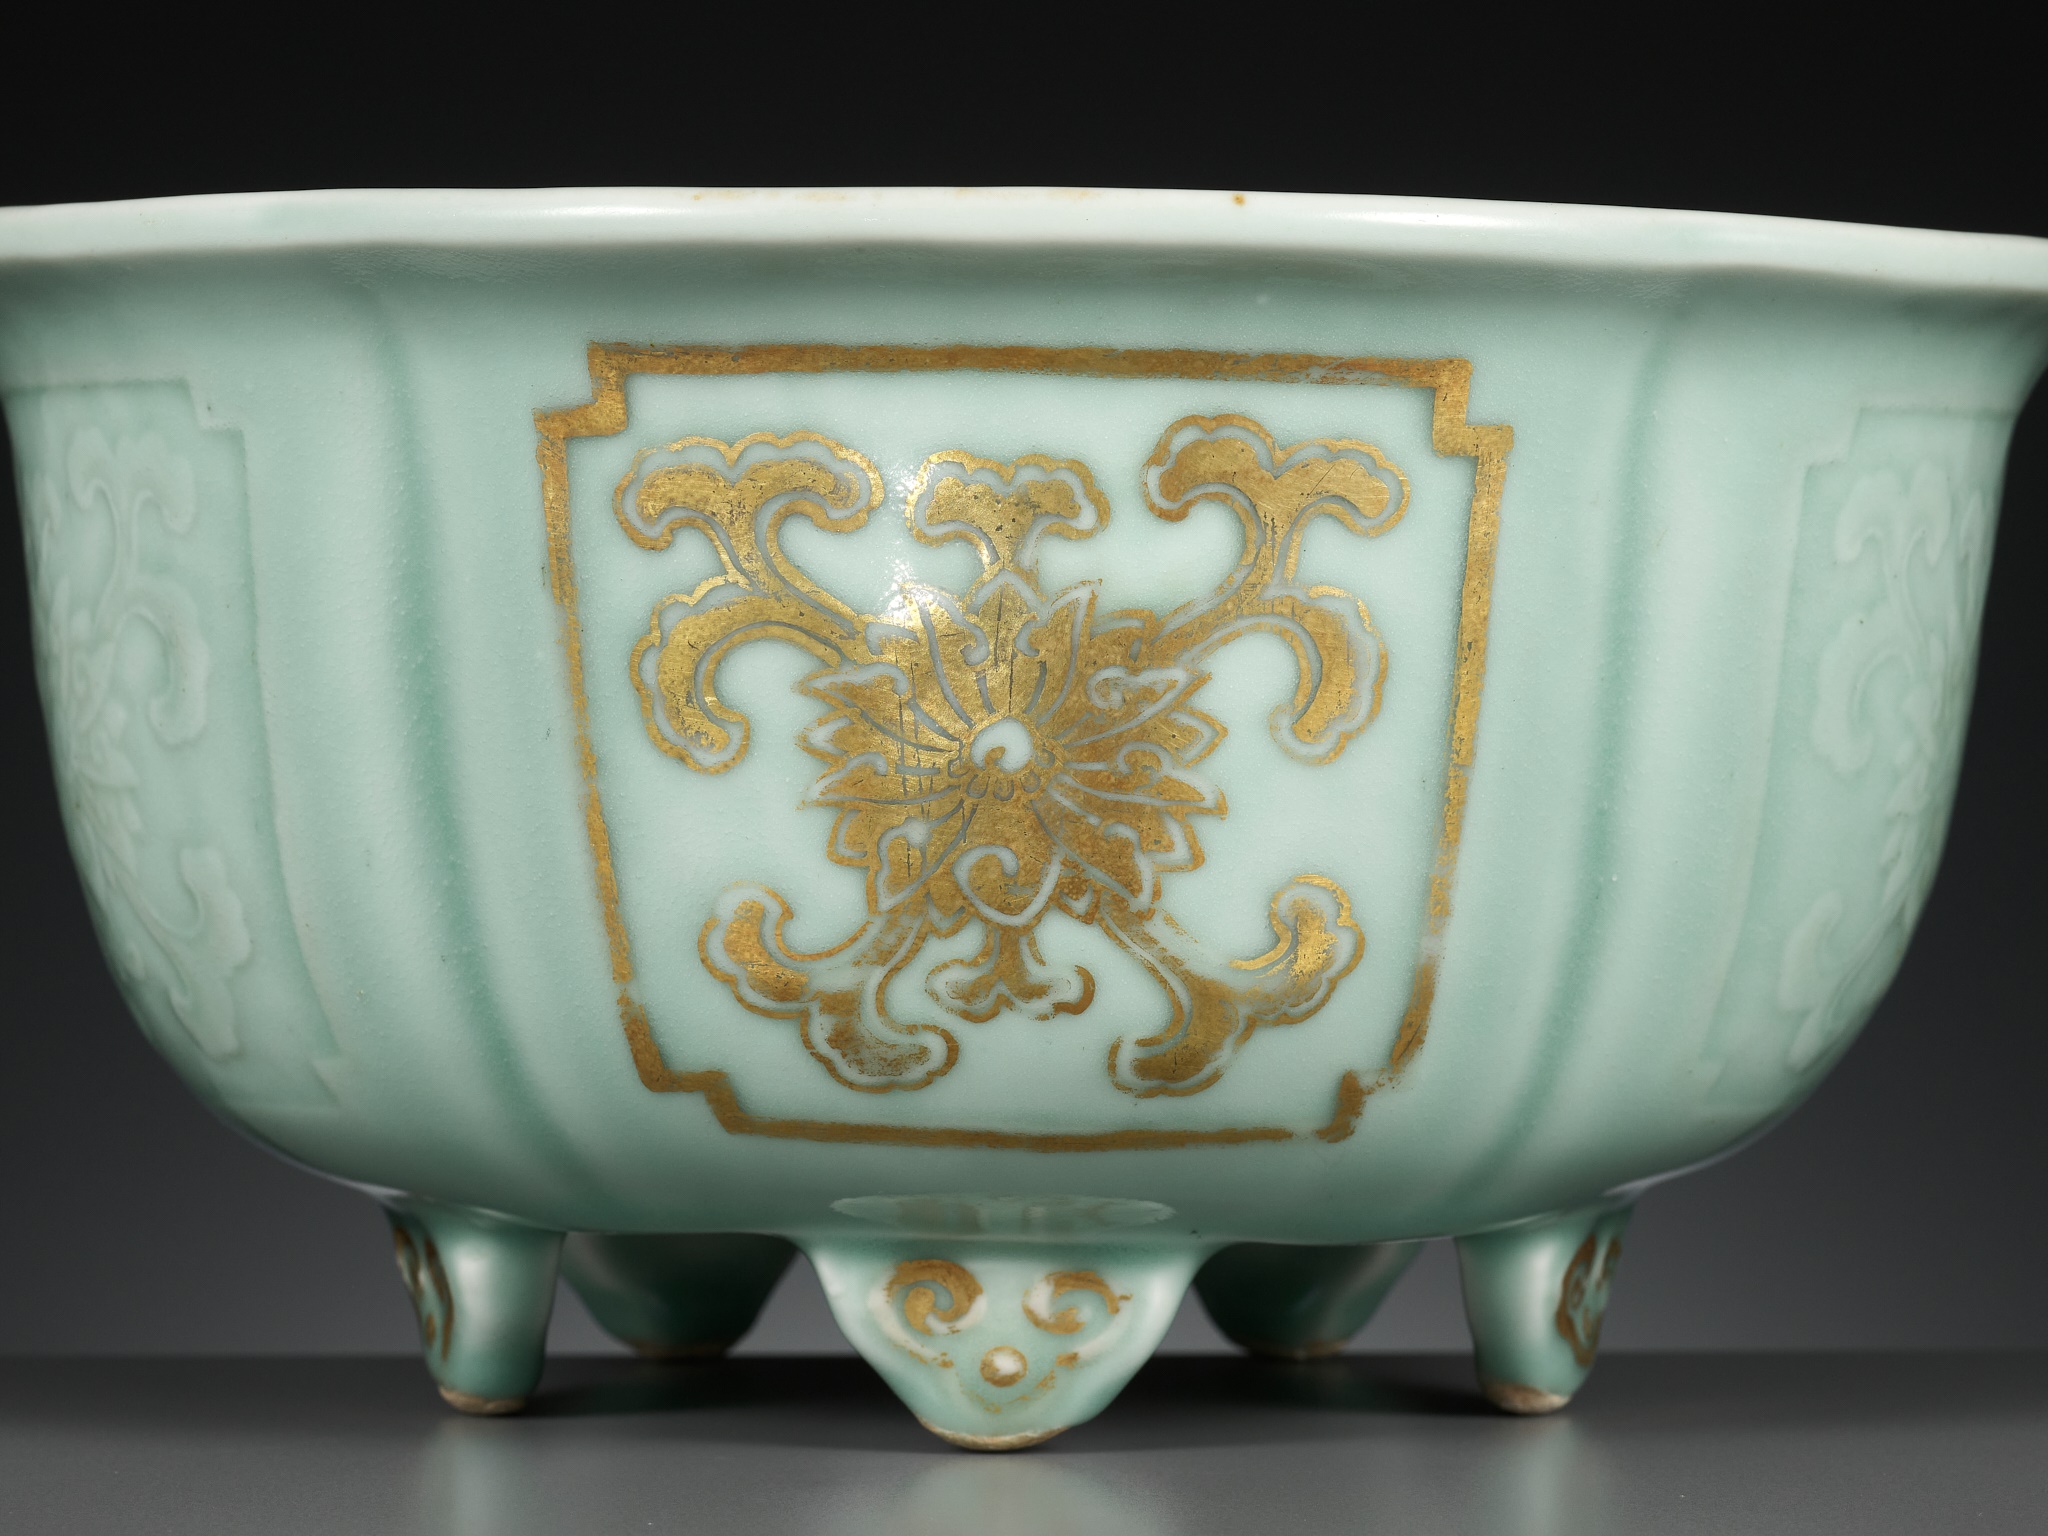 A MOLDED, LOBED AND GILT CELADON-GLAZED JARDINIERE, QIANLONG MARK AND PERIOD - Image 8 of 13